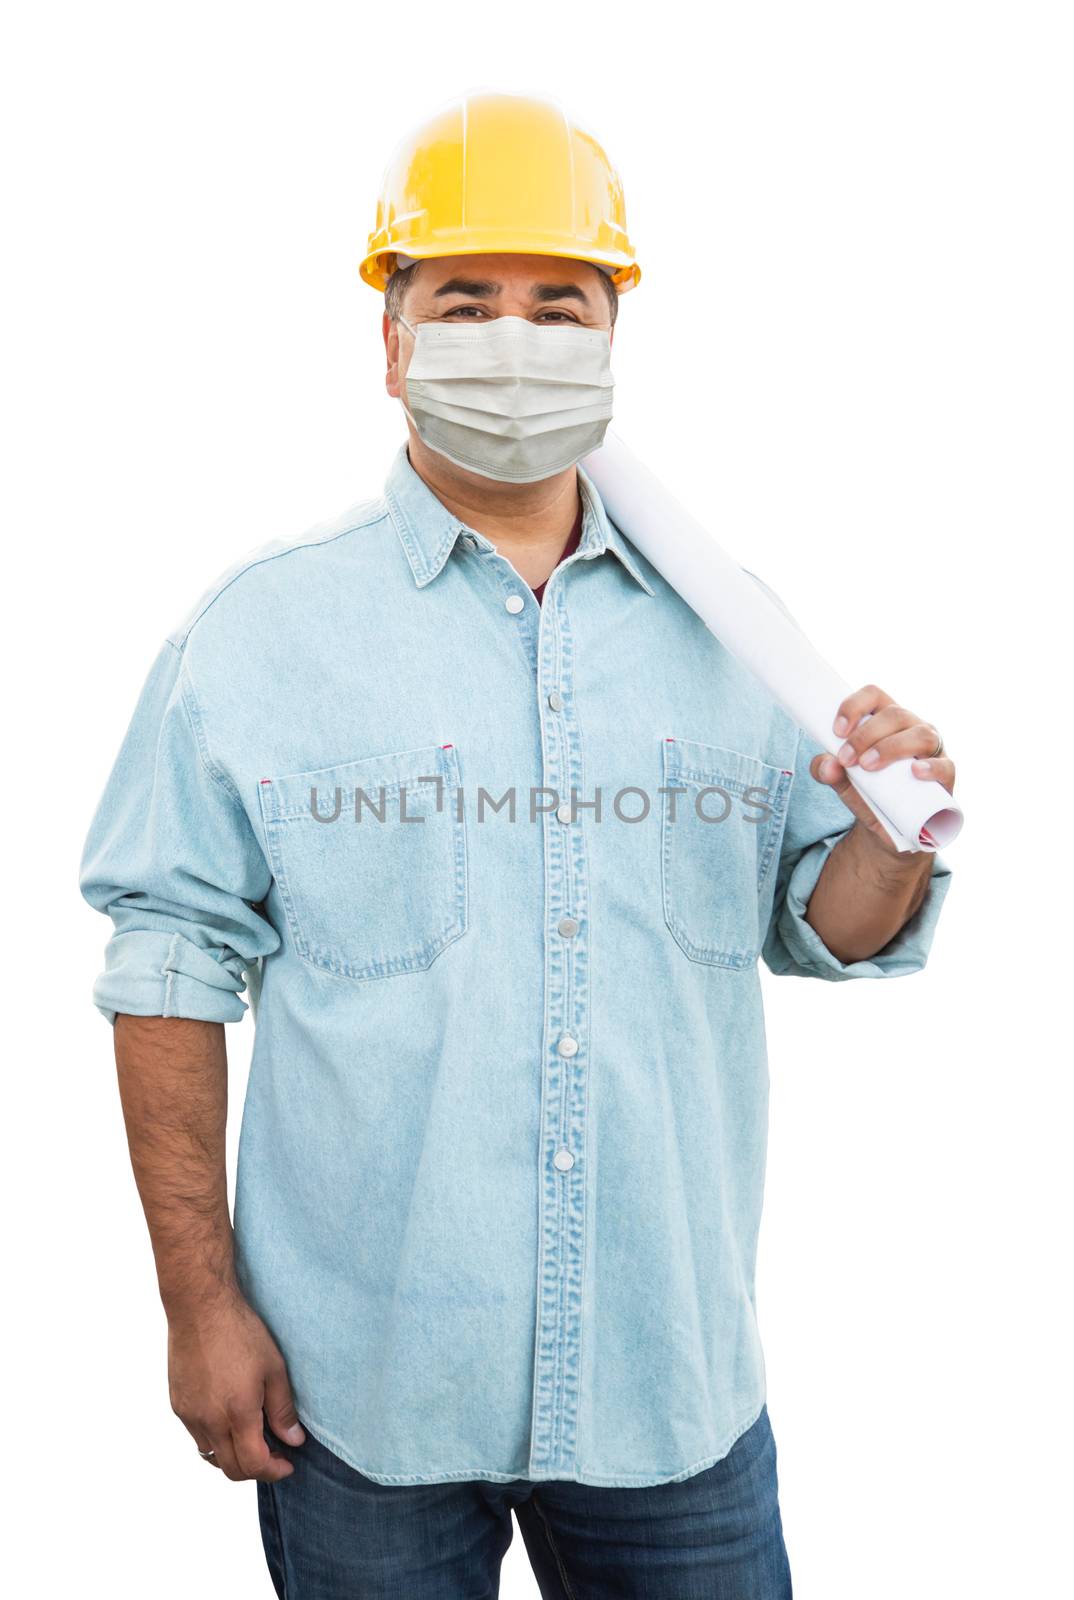 Male Contractor In Hard Hat Wearing Medical Face Mask During Cor by Feverpitched